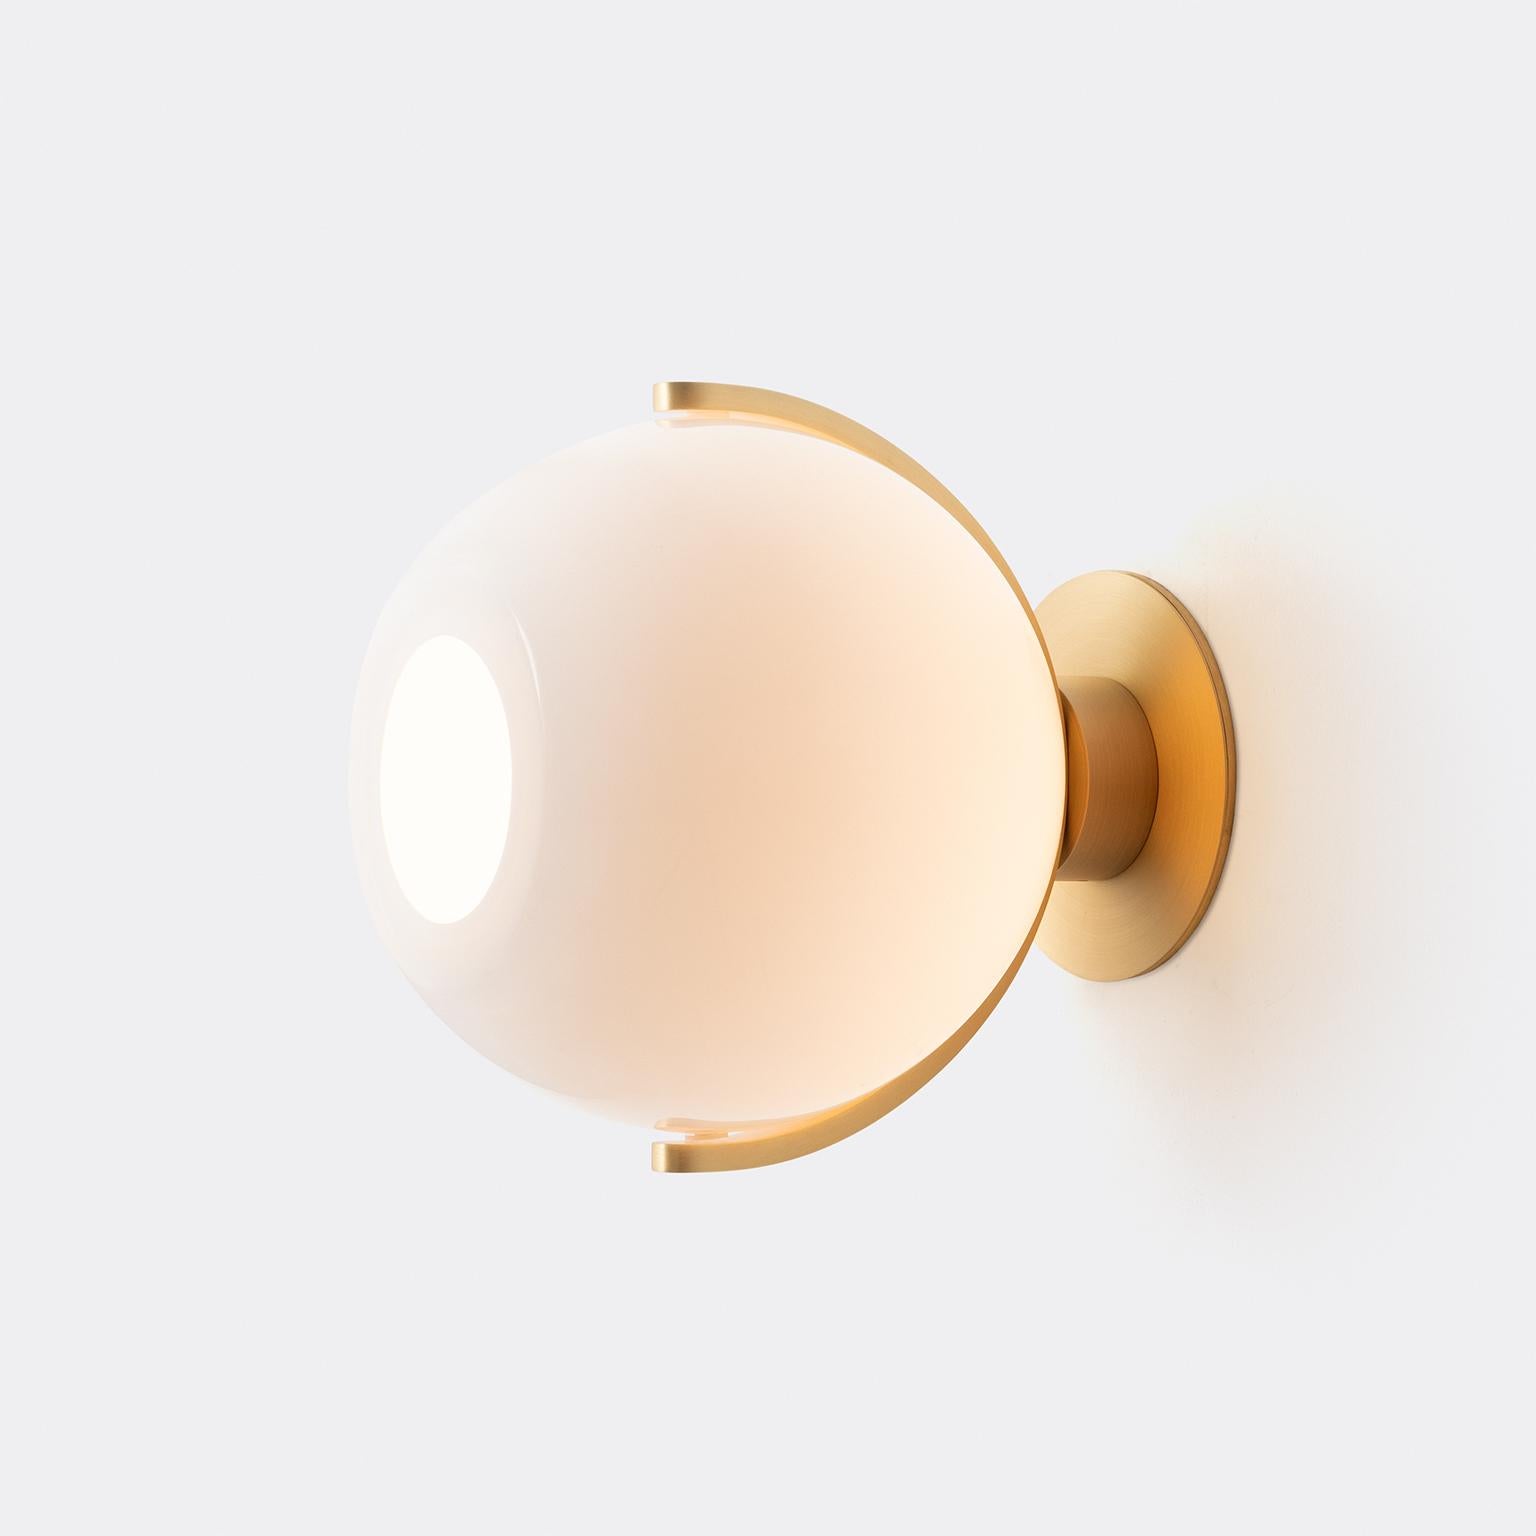 Holly Hunt HH2051645 Another Day sconce with brass by Damien Langlois-Meurinne

Additional Information:
Materials: Brass, glass
Frame finish: Satin varnished brushed brass
Glass finish: White glass
Diffuser: Glass
Illumination: Socket base,